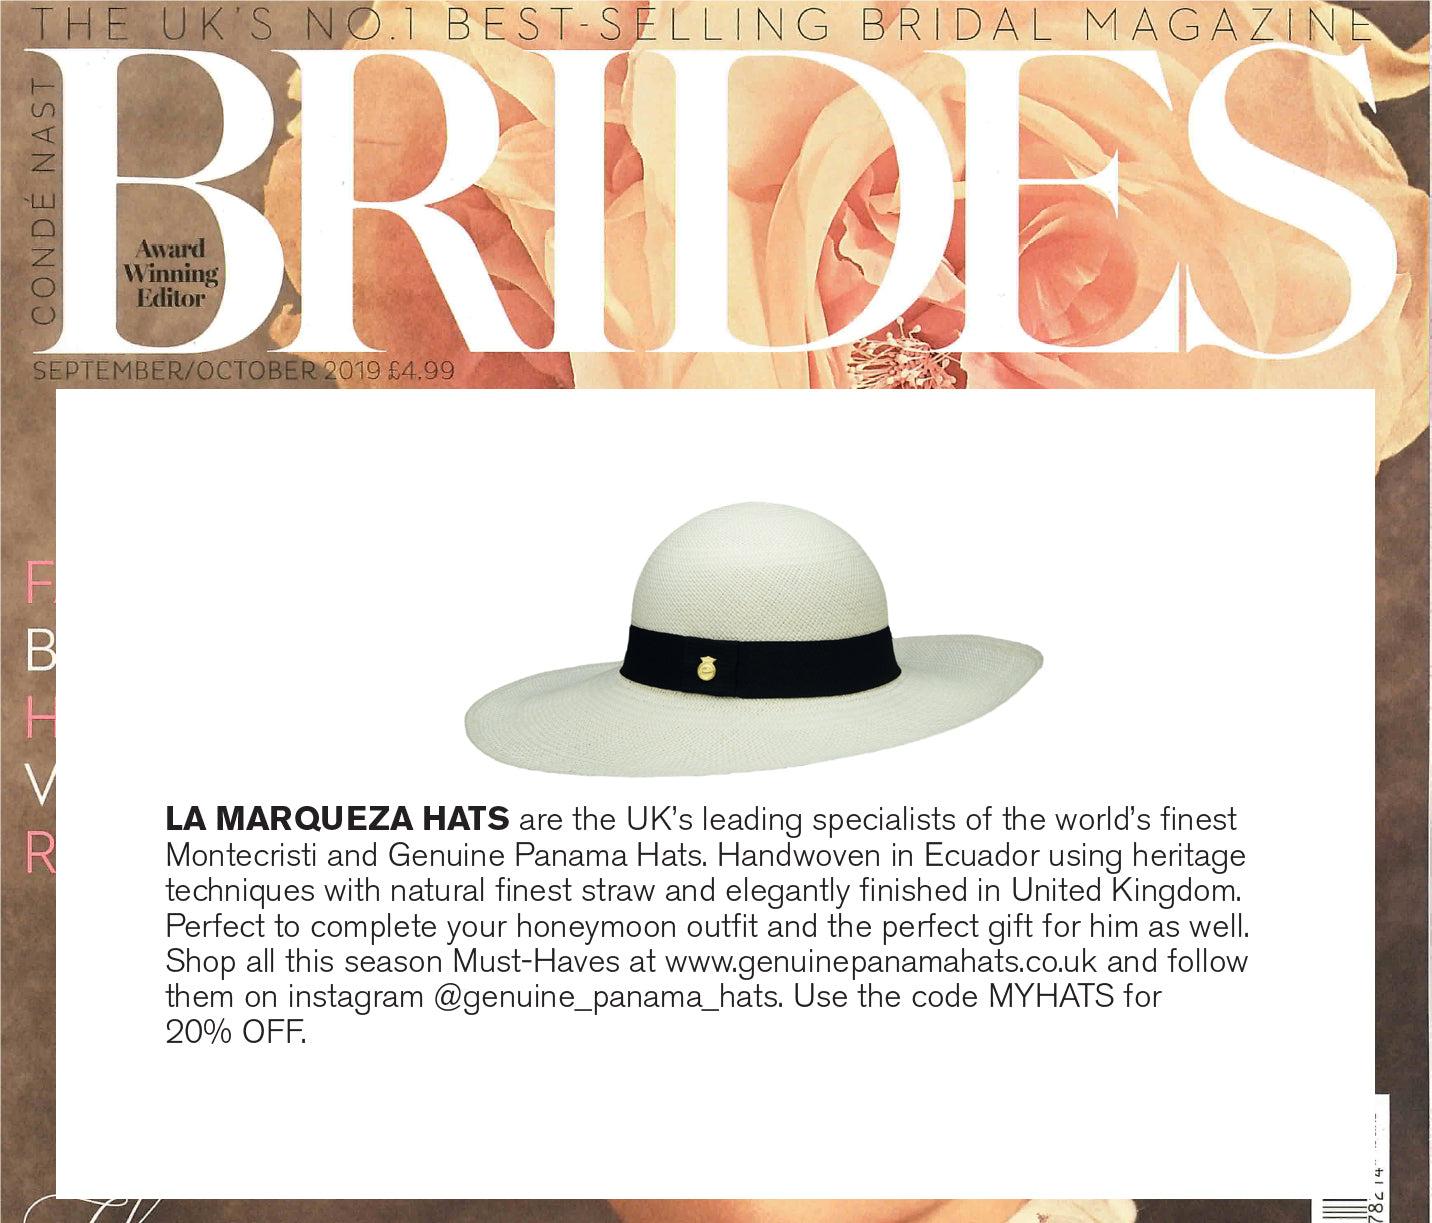 AS FEATURED IN BRIDES MAGAZINE - LA MARQUEZA HATS, SEPTEMBER/OCTOBER ISSUE